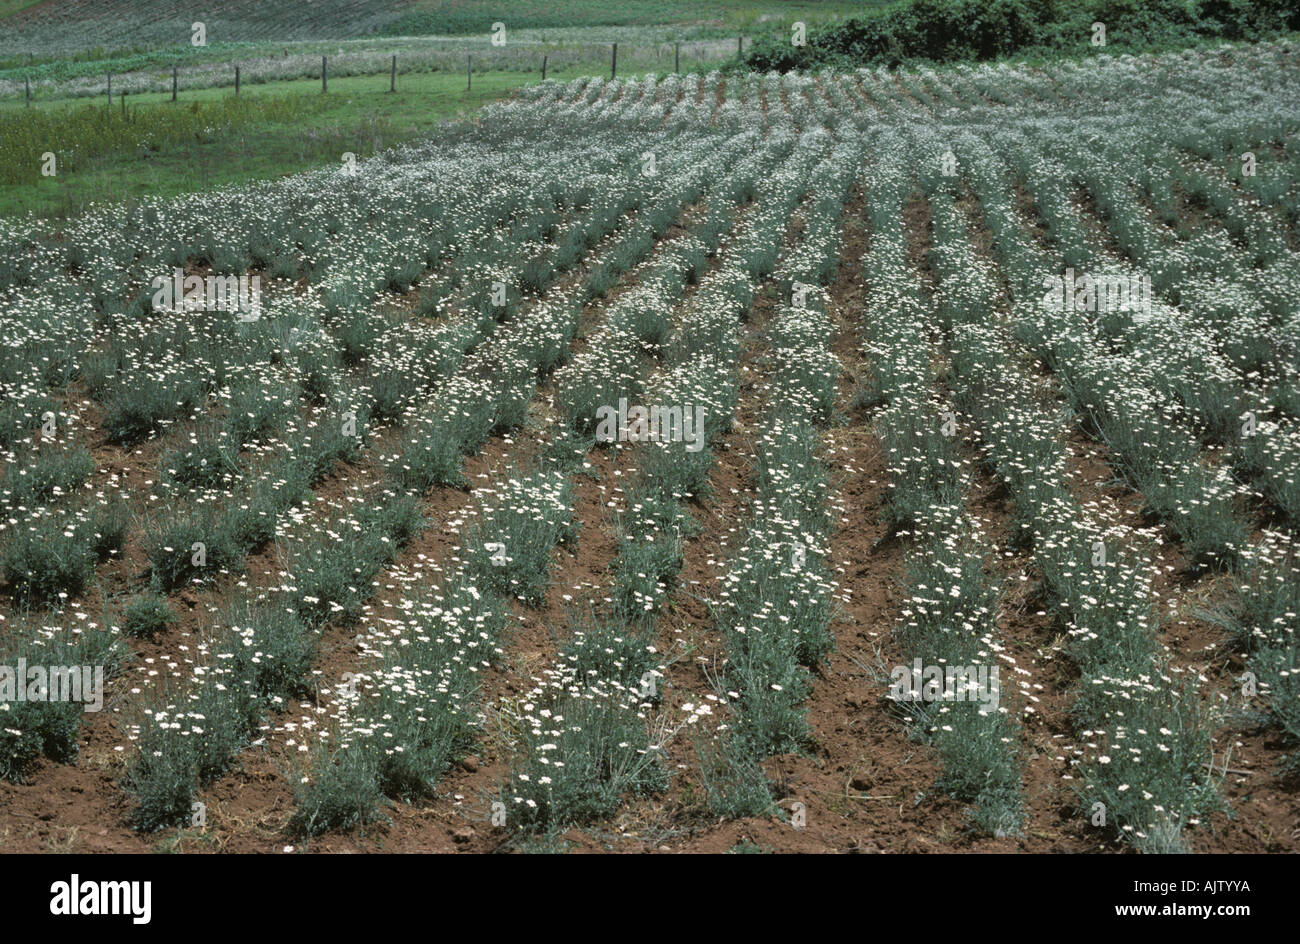 A flowering crop of pyrethrum used as a natural insecticide Kenya Stock Photo